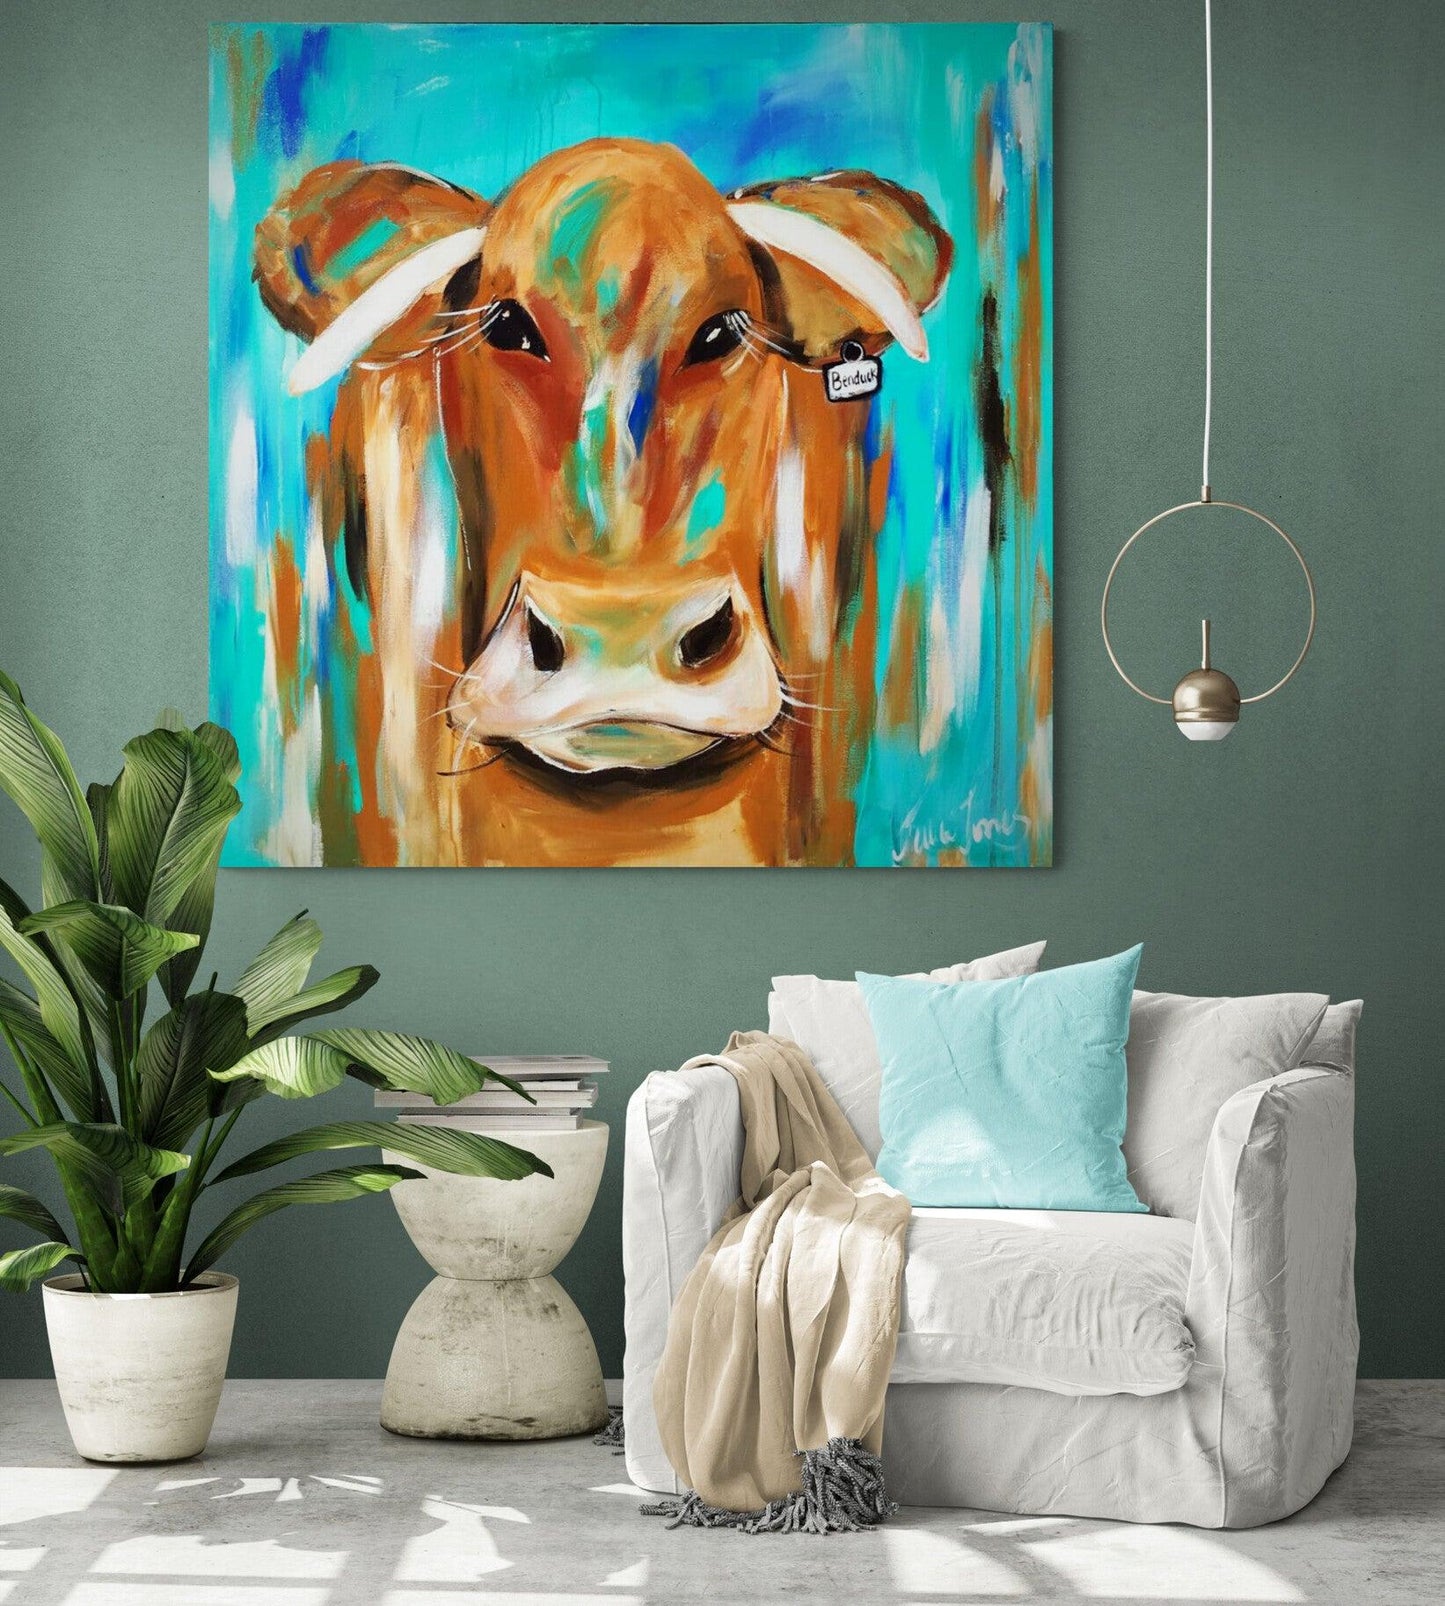 A Cows life 900 x 900 - Original Artwork - Available by Commission